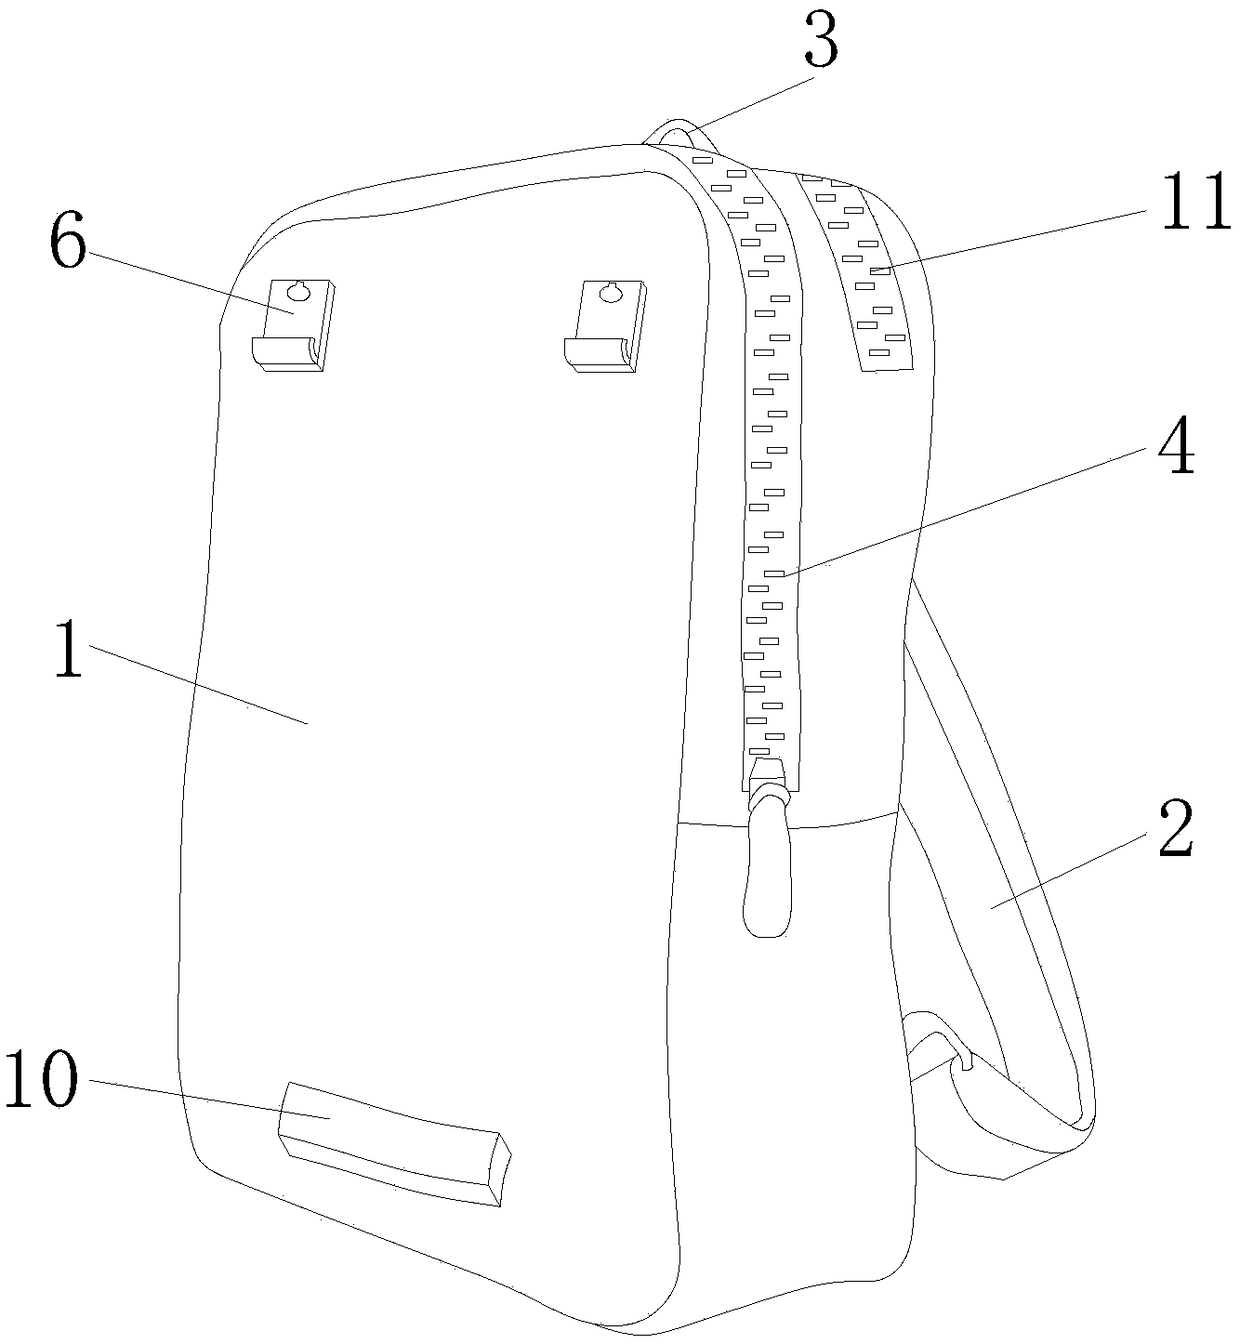 Backpack having fall-preventing function and facilitating pet carrying